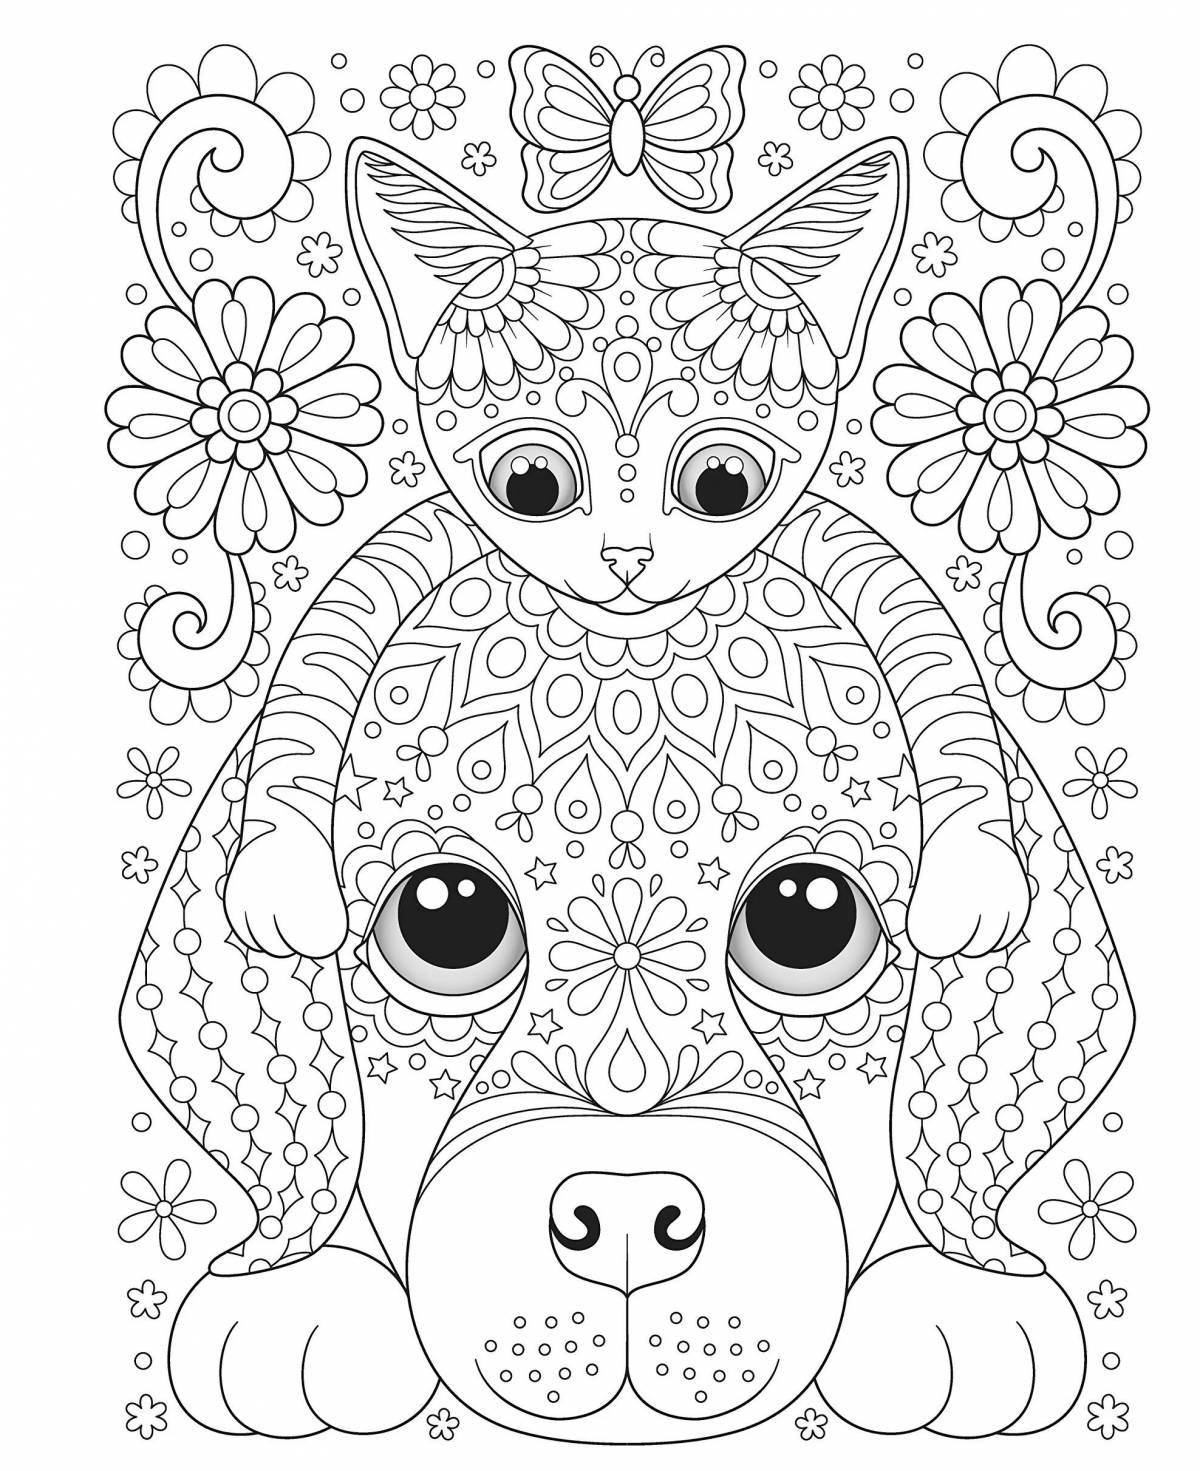 Intelligent dog coloring pages for adults